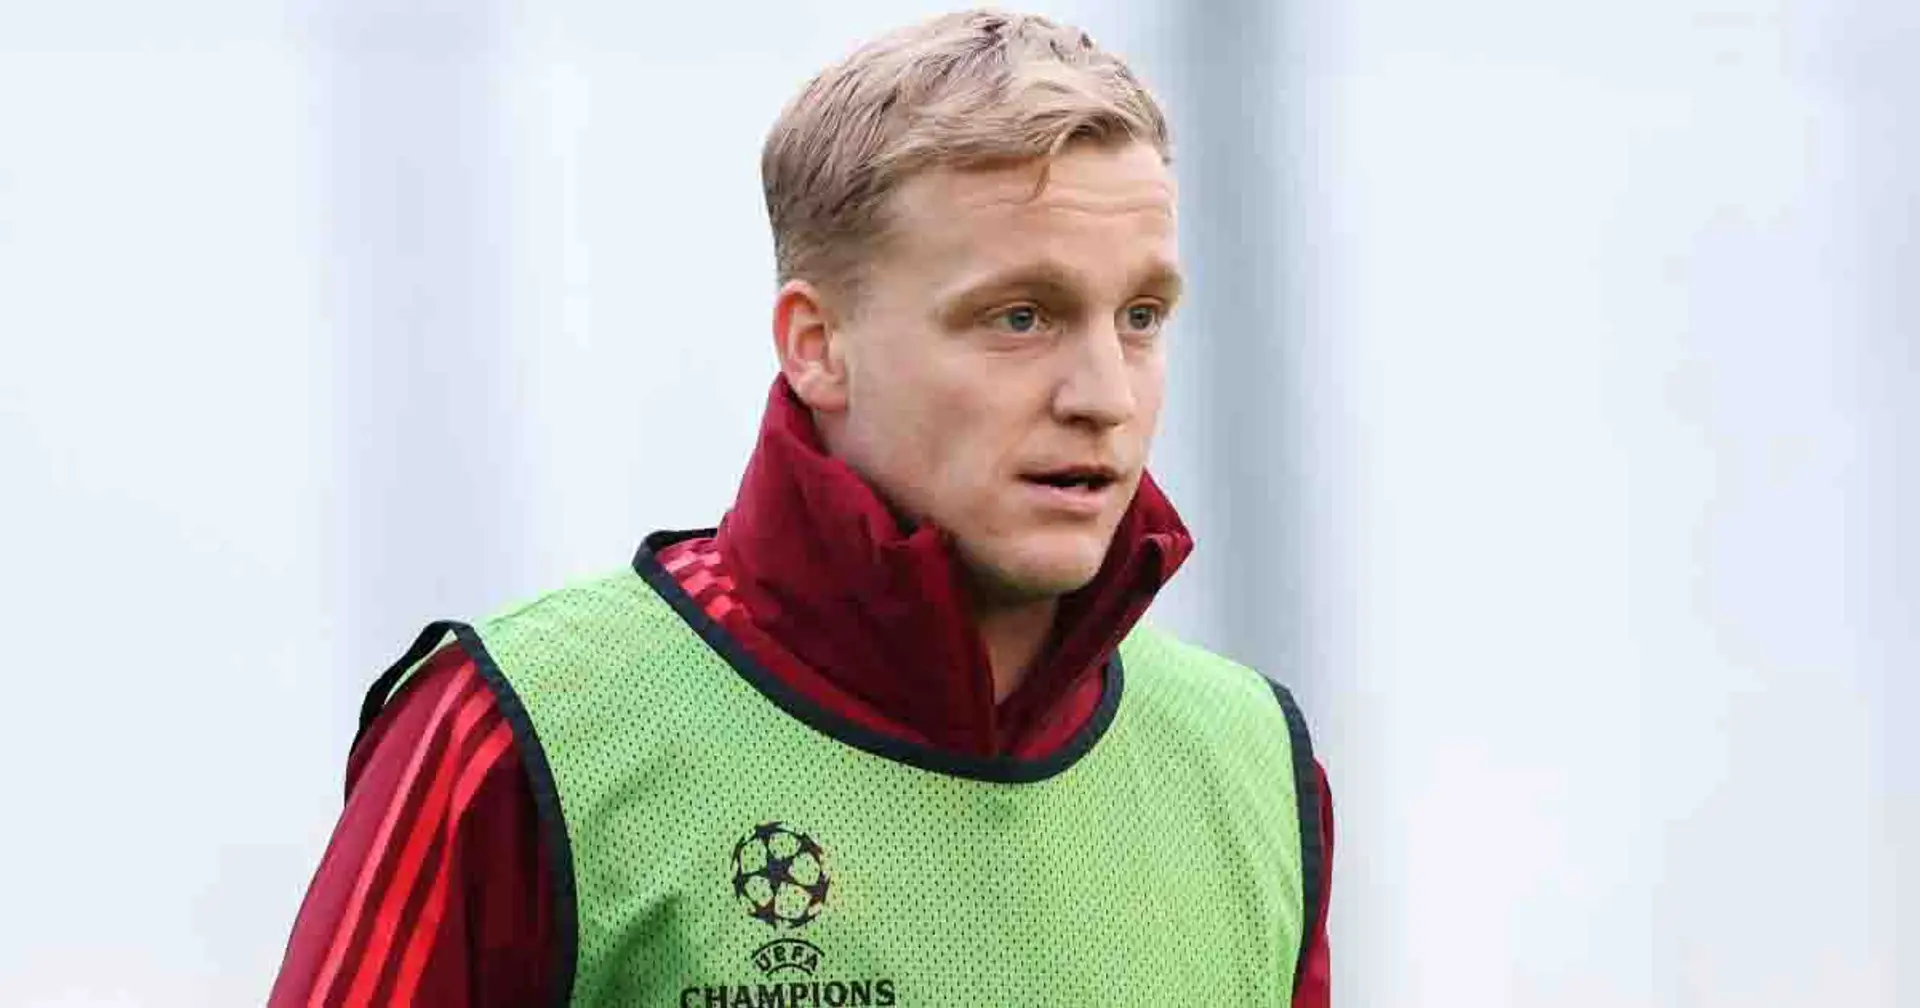 Man United discussing Van de Beek loan deal with two clubs, his likeliest destination named (reliability: 5 stars)